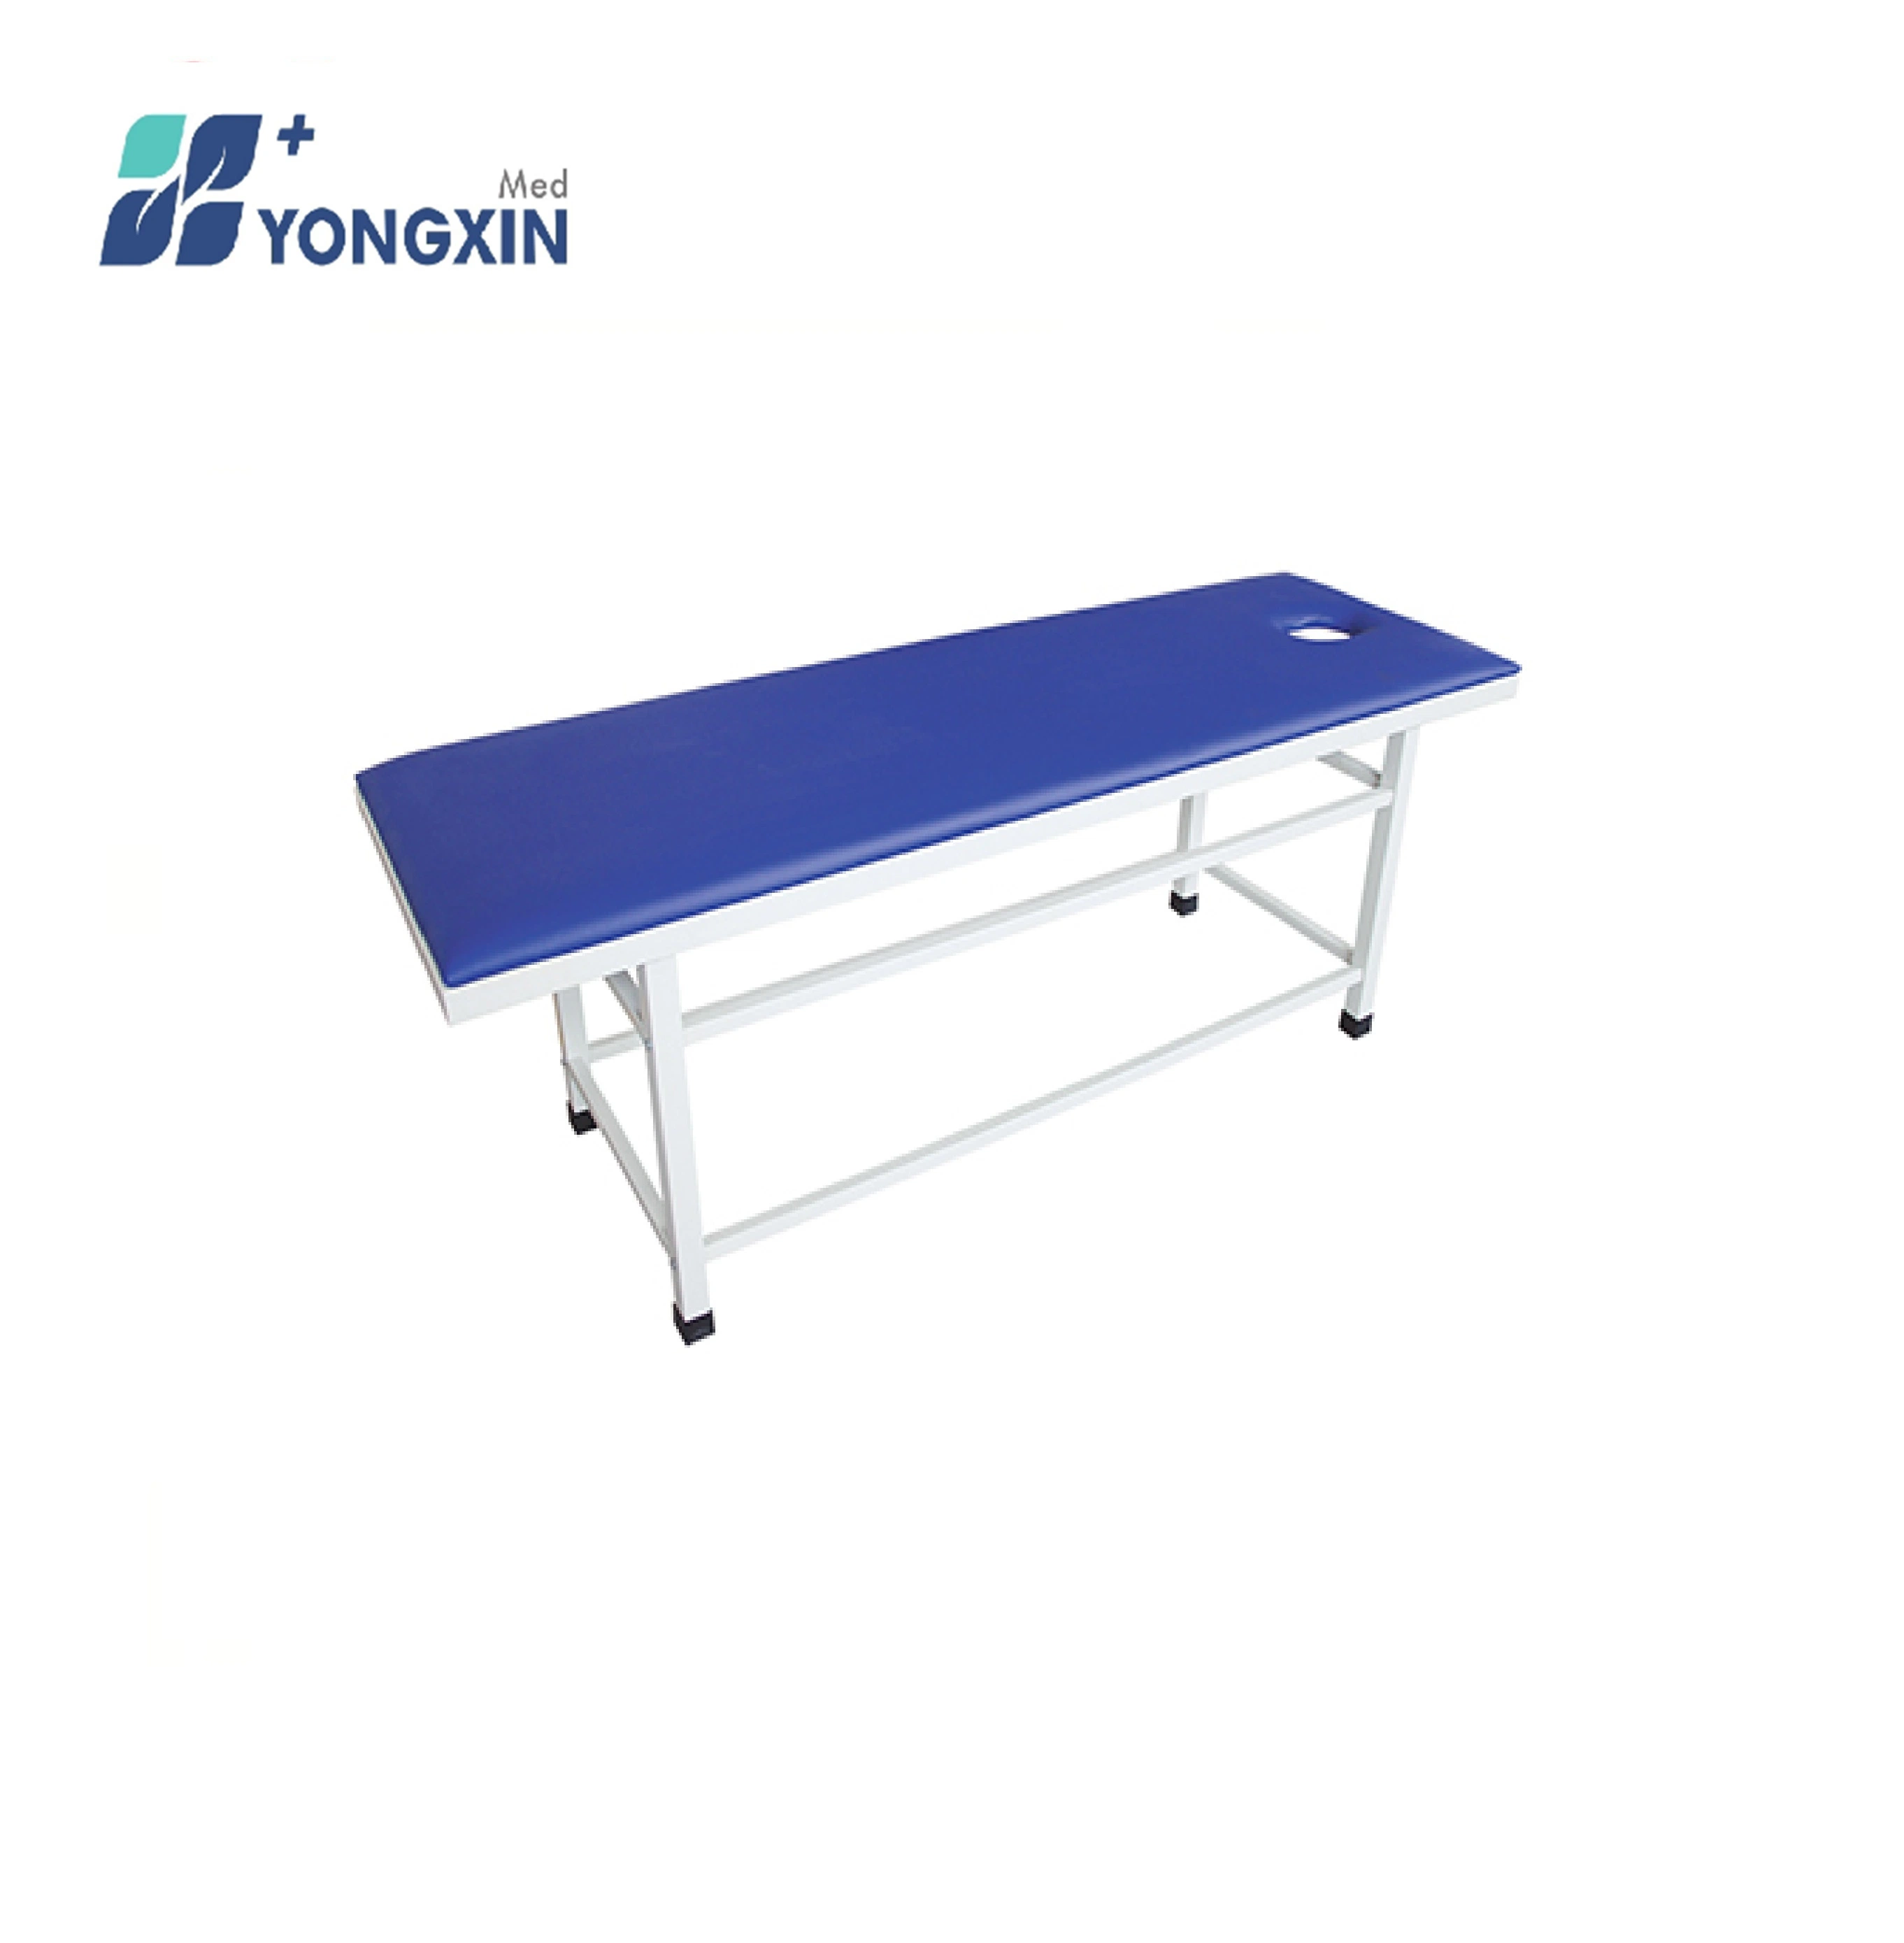 Yxz-007 Hospital Furniture Medical Equipment Steel Adjustable Examination Couch Table